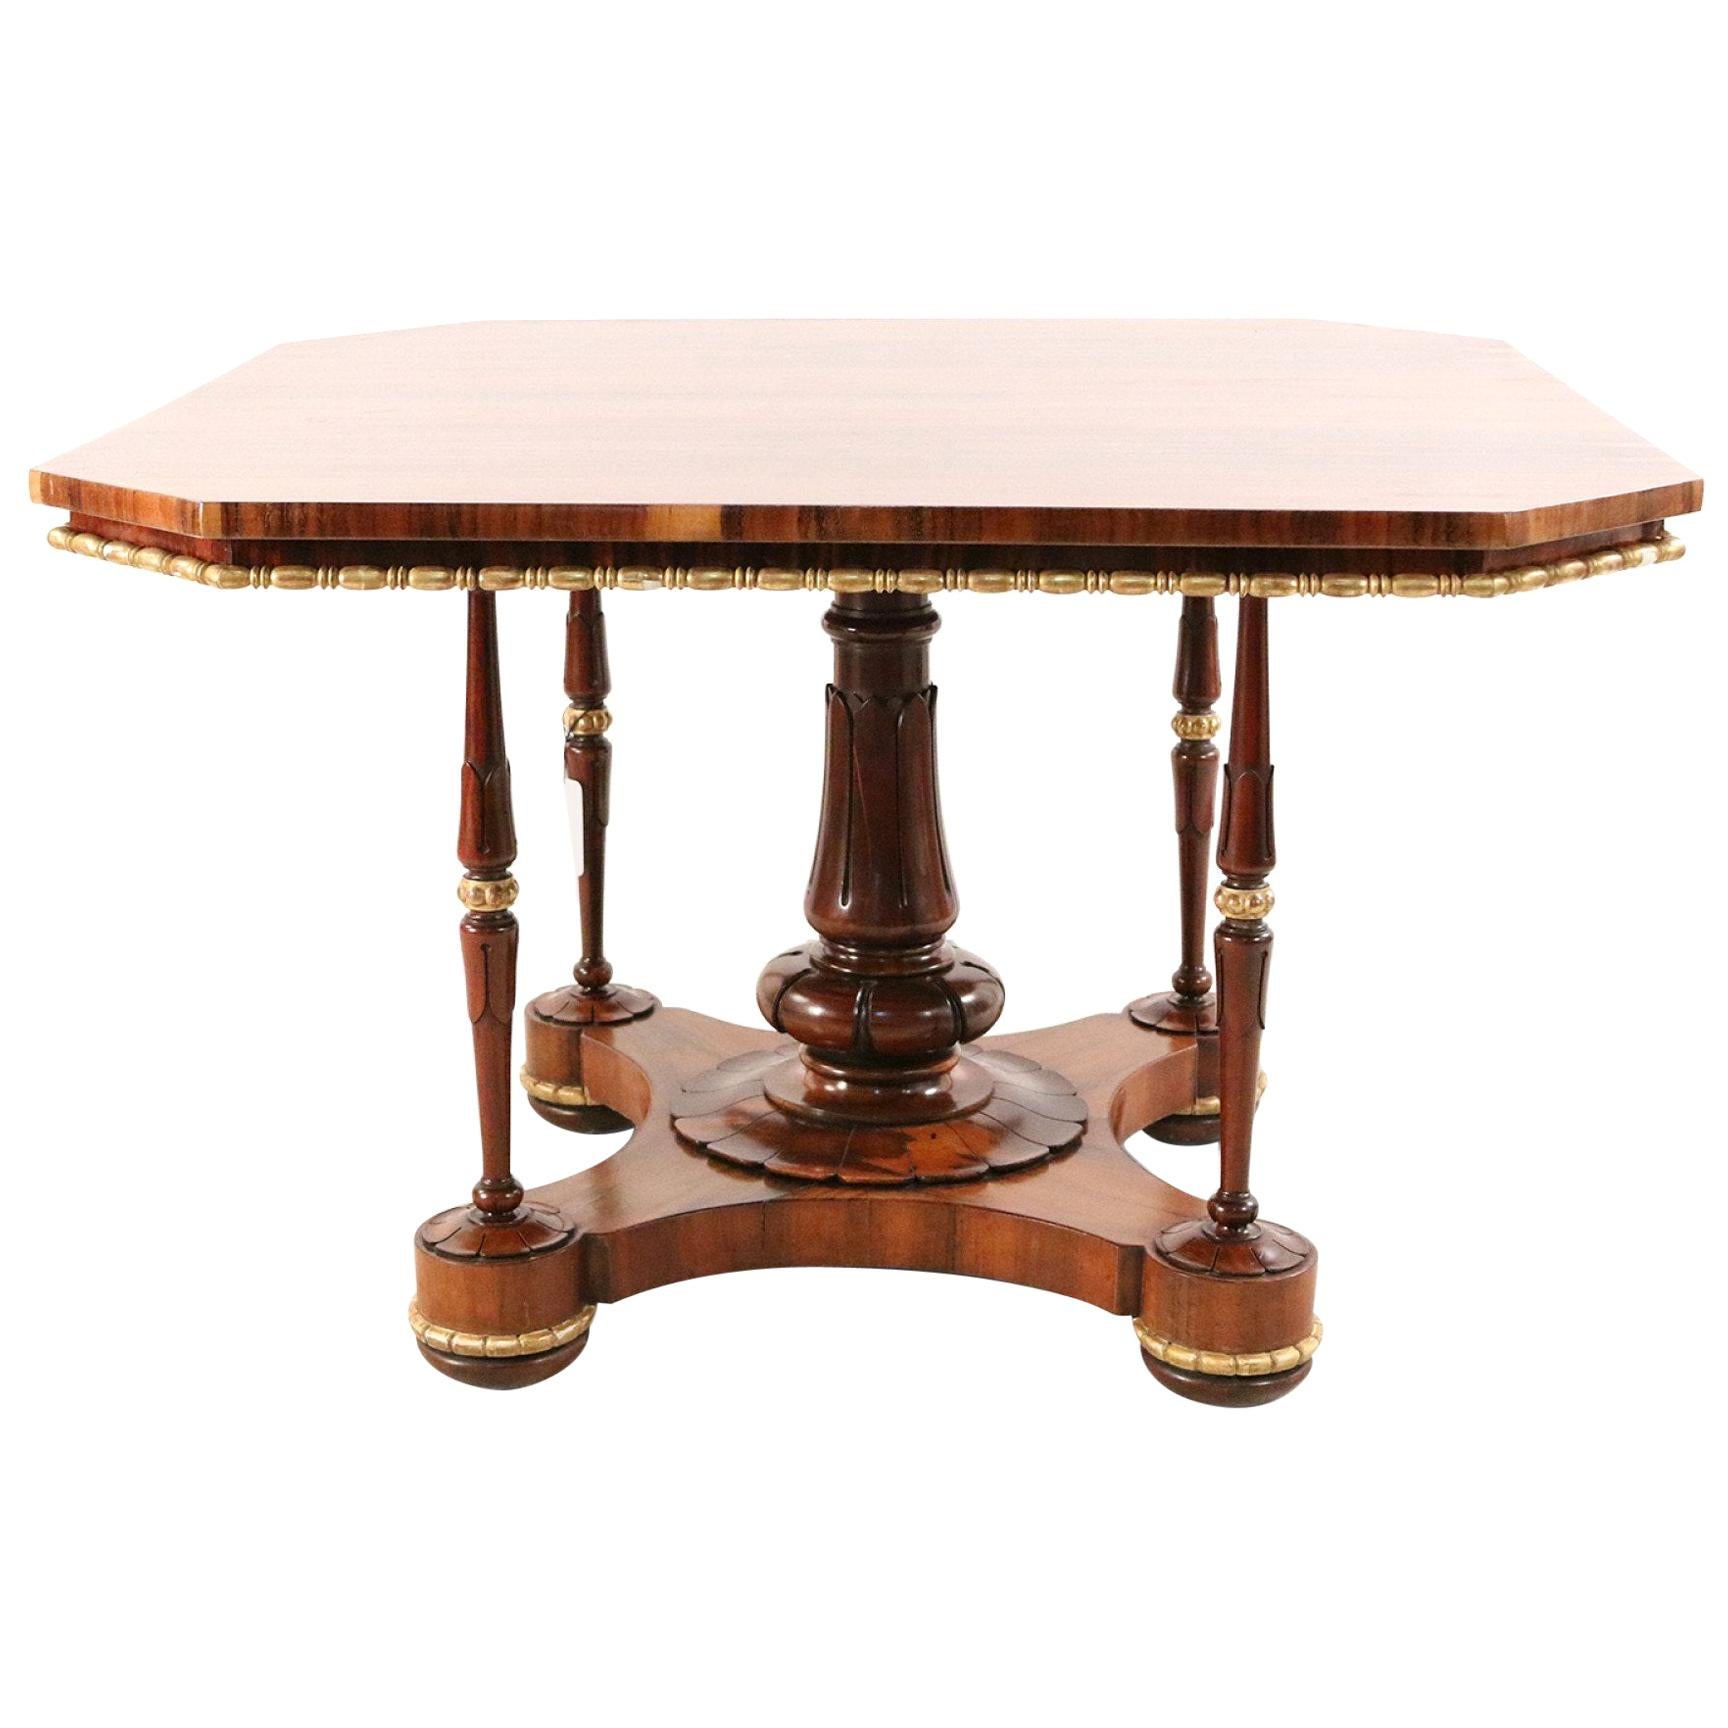 English Regency Octagonal Rosewood and Brass Trim Center Table